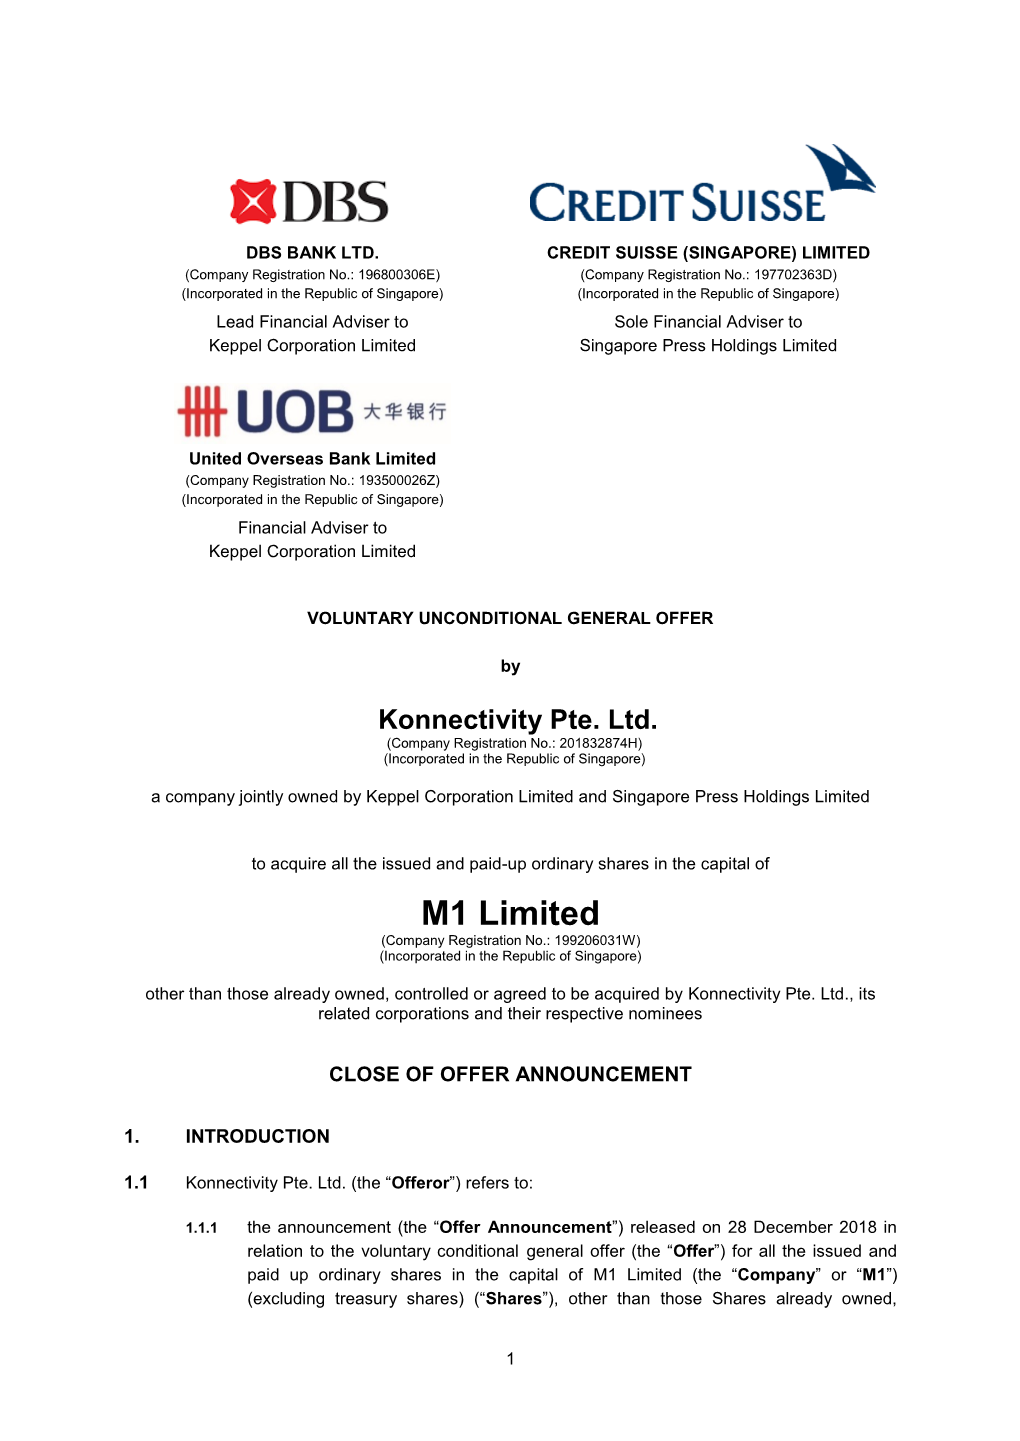 M1 Limited (Company Registration No.: 199206031W) (Incorporated in the Republic of Singapore)